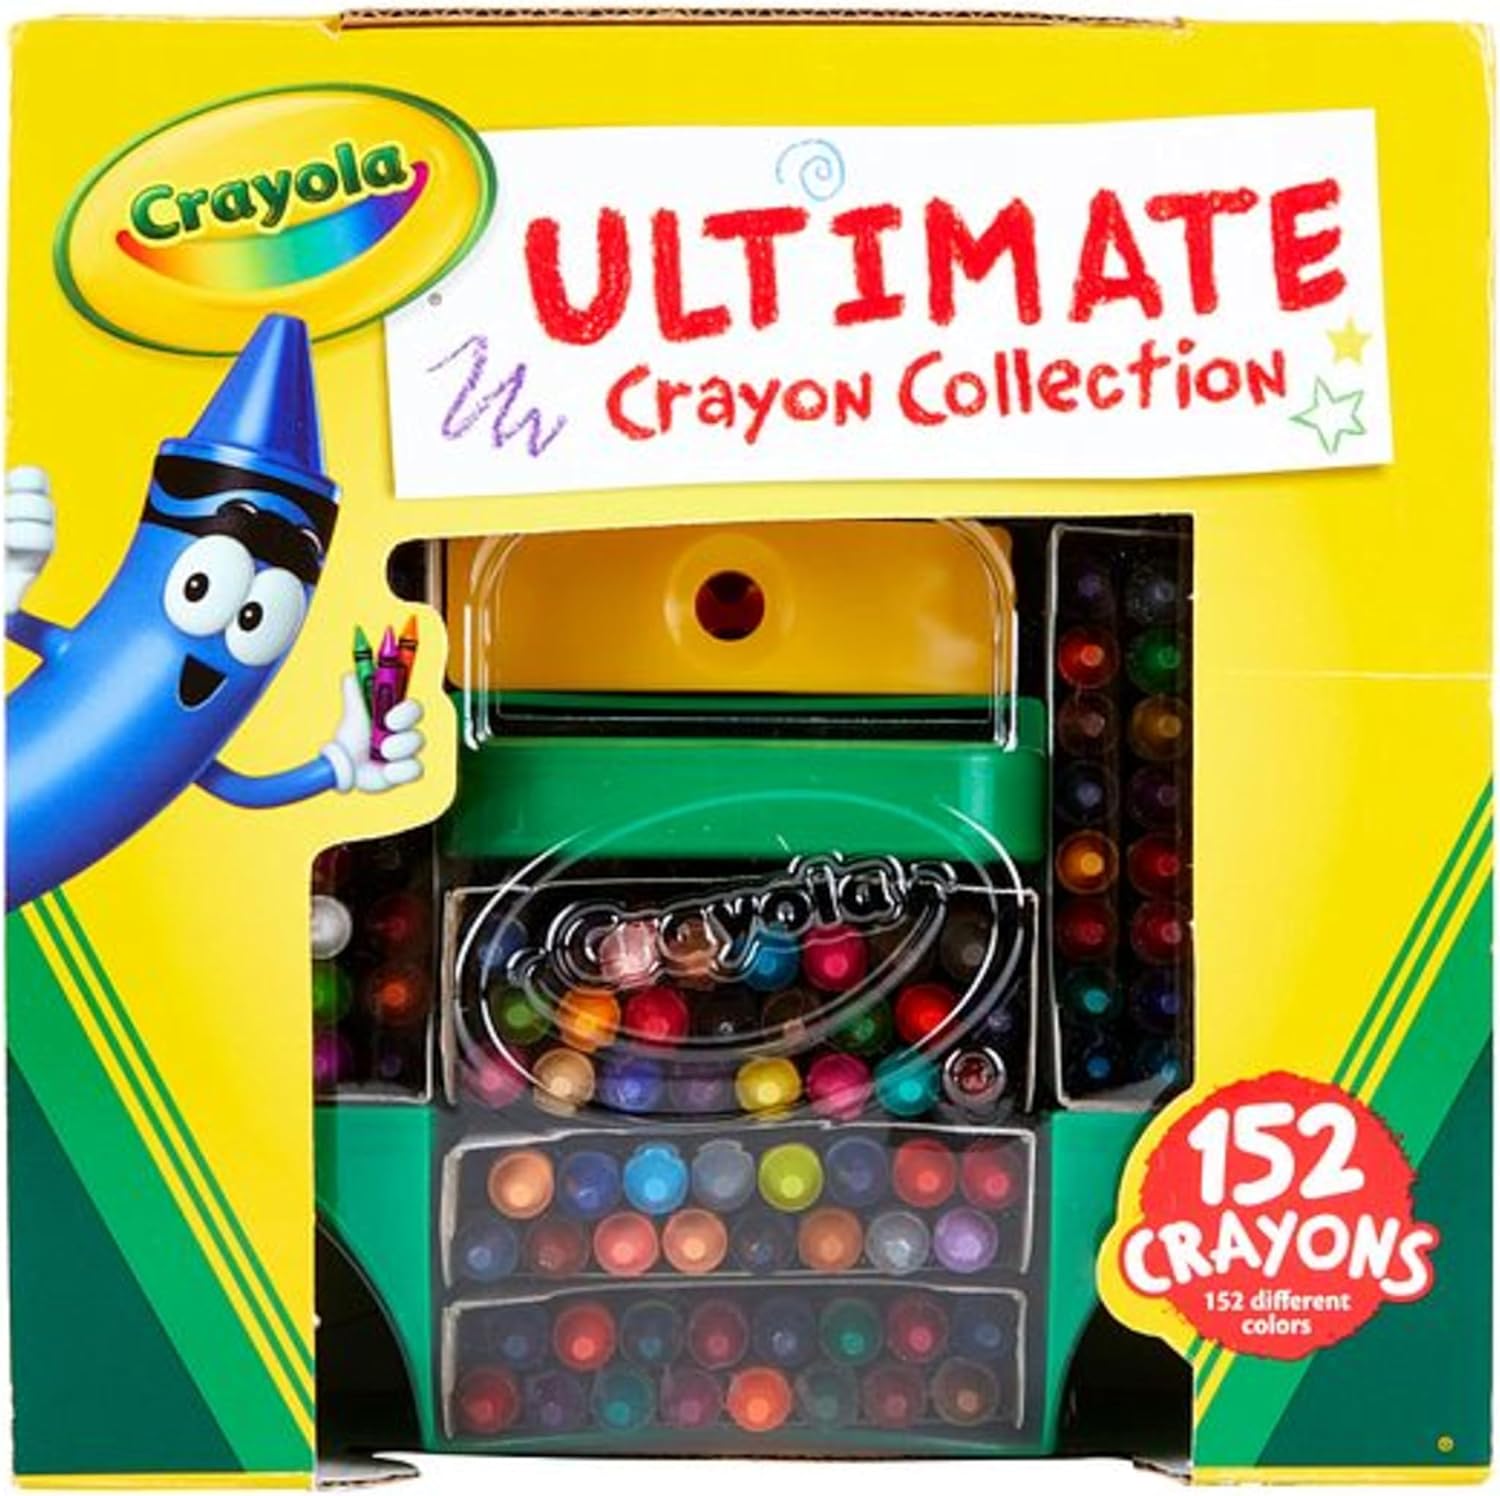 Crayola Ultimate Crayon Box Collection (152ct), Bulk Kids Crayon Caddy, Classic & Glitter Crayons, Gifts, Ages 3+